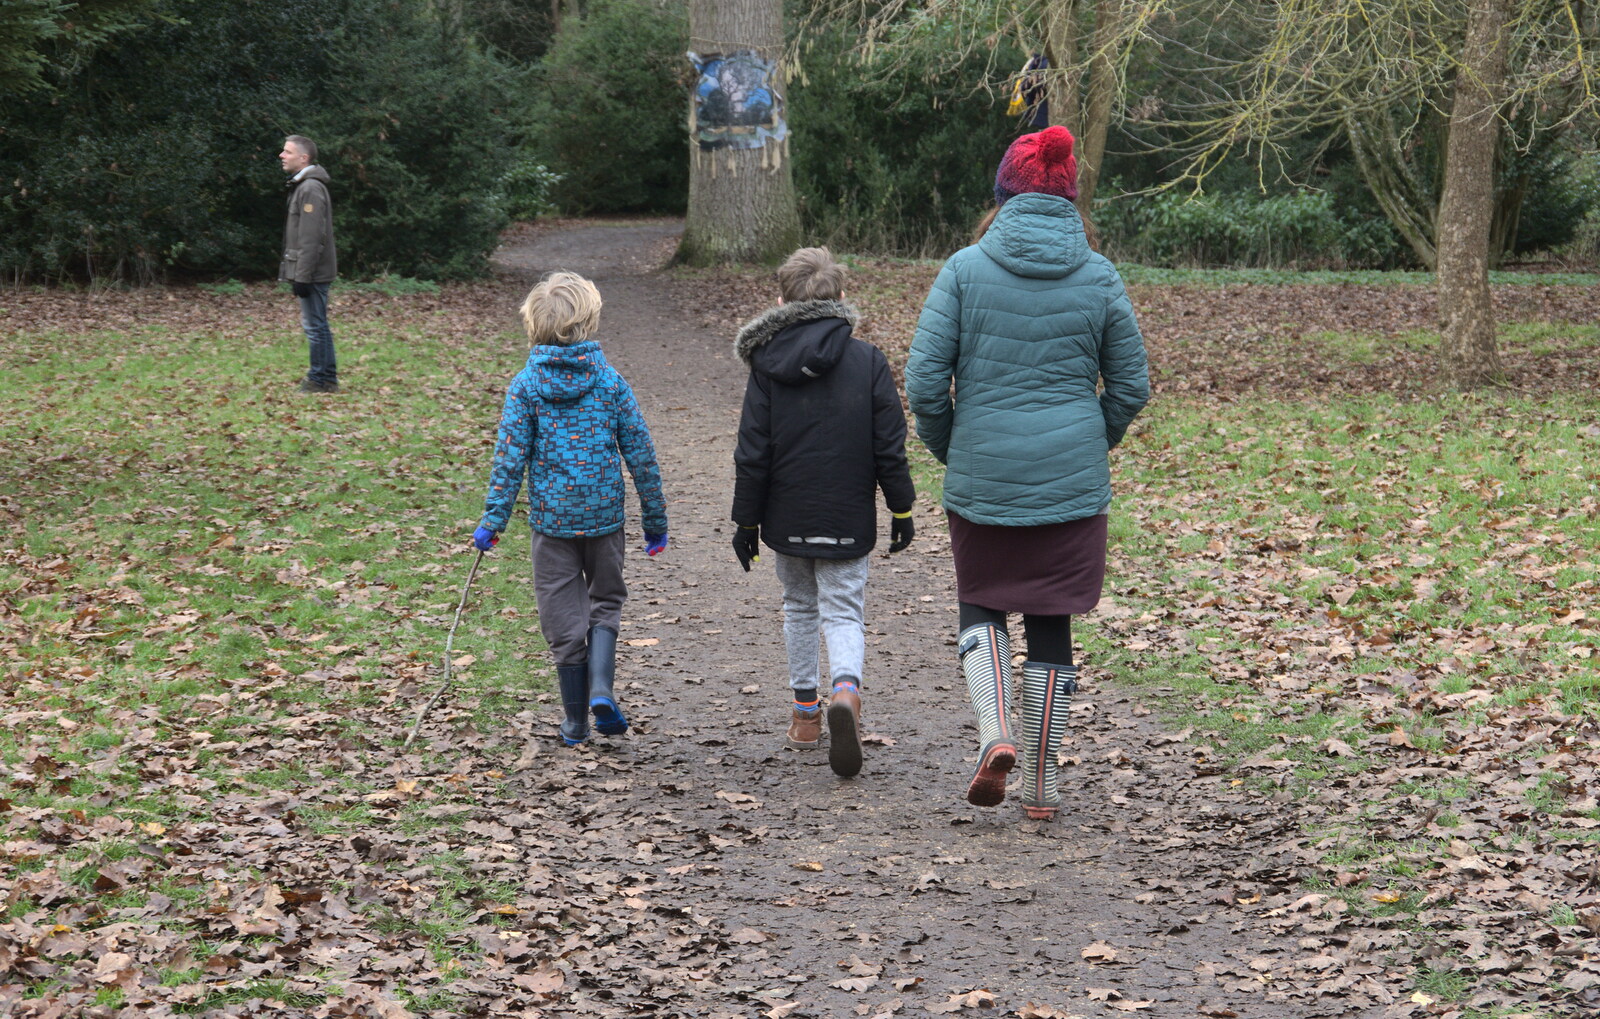 Harry, Fred and Isobel from Ickworth House, Horringer, Suffolk - 29th December 2018